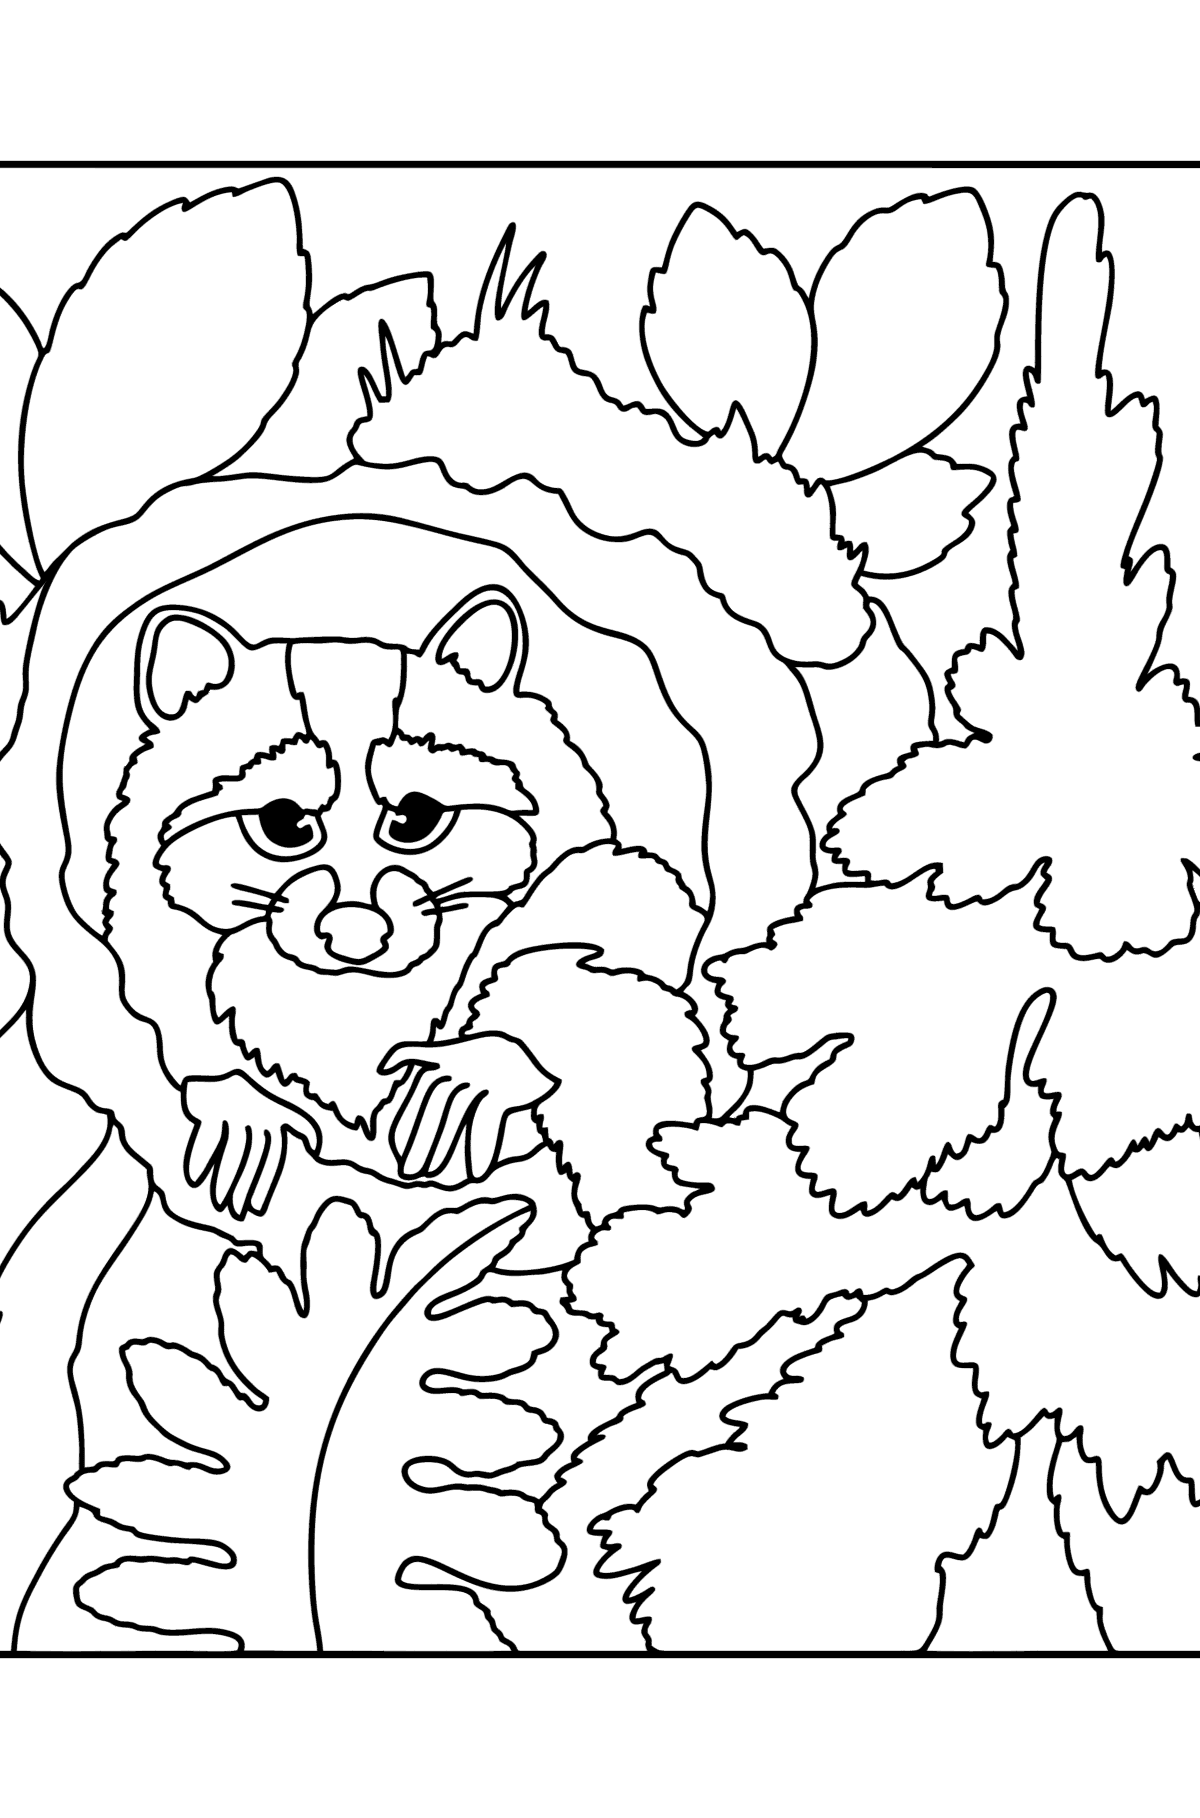 Raccoon in the forest сoloring page - Coloring Pages for Kids